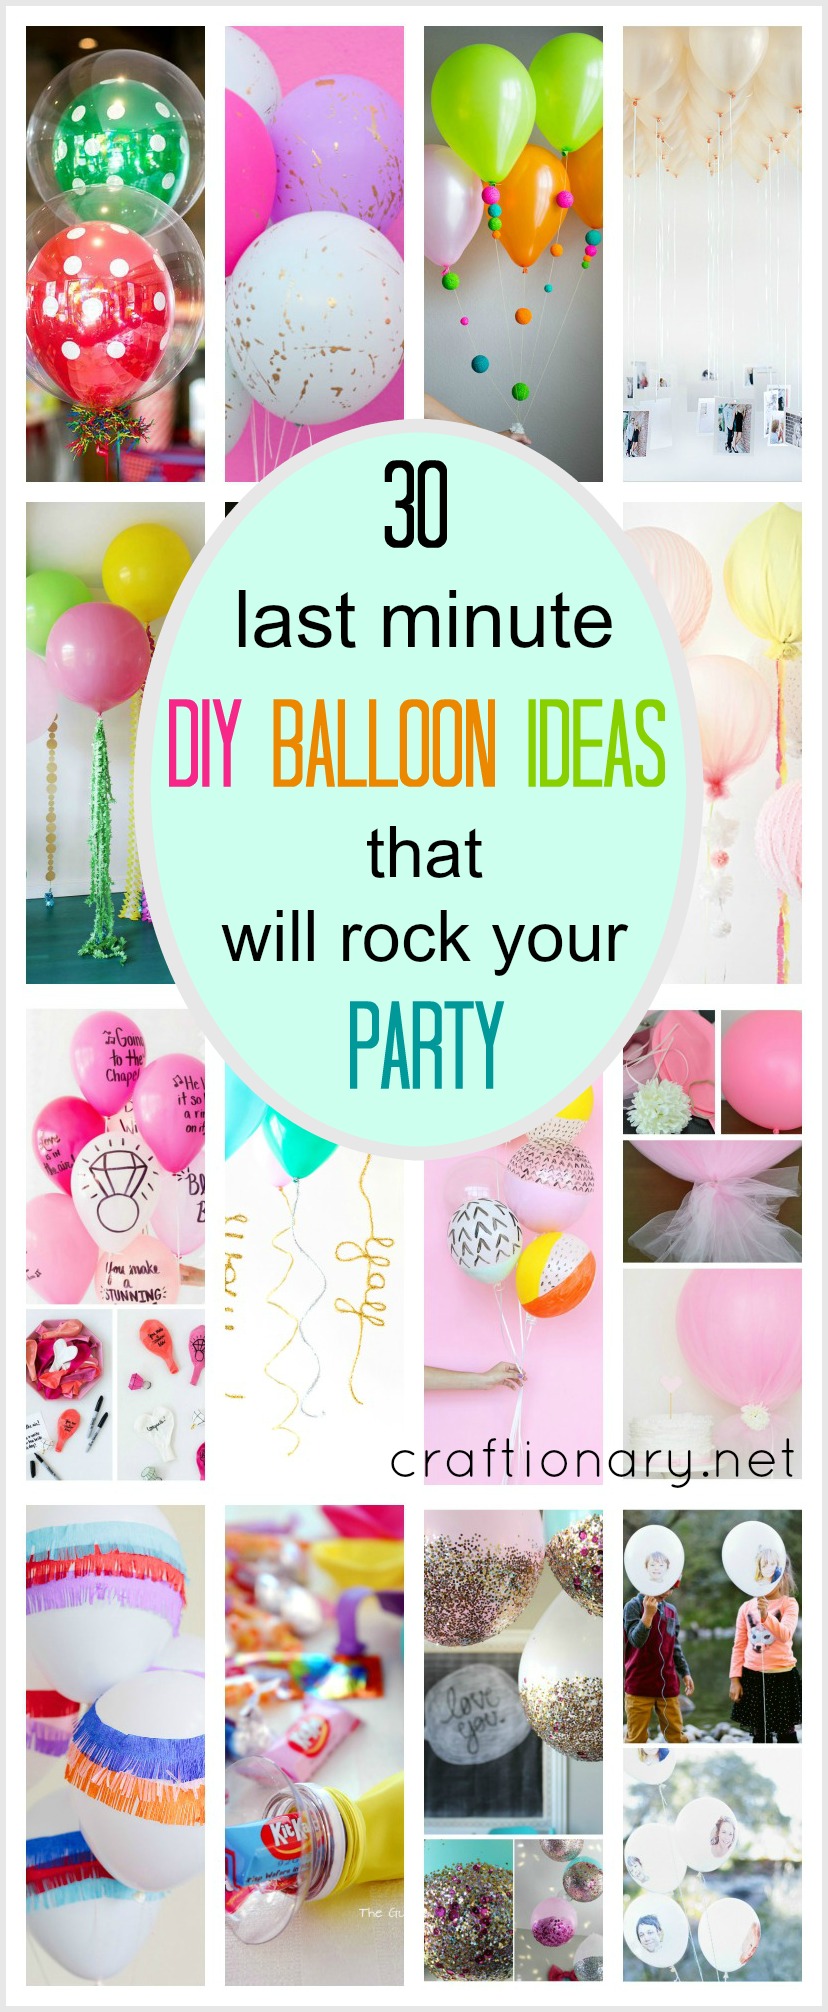 Tips for Creative Home Balloon Decoration - Funzoop The Party Shop – FUNZOOP